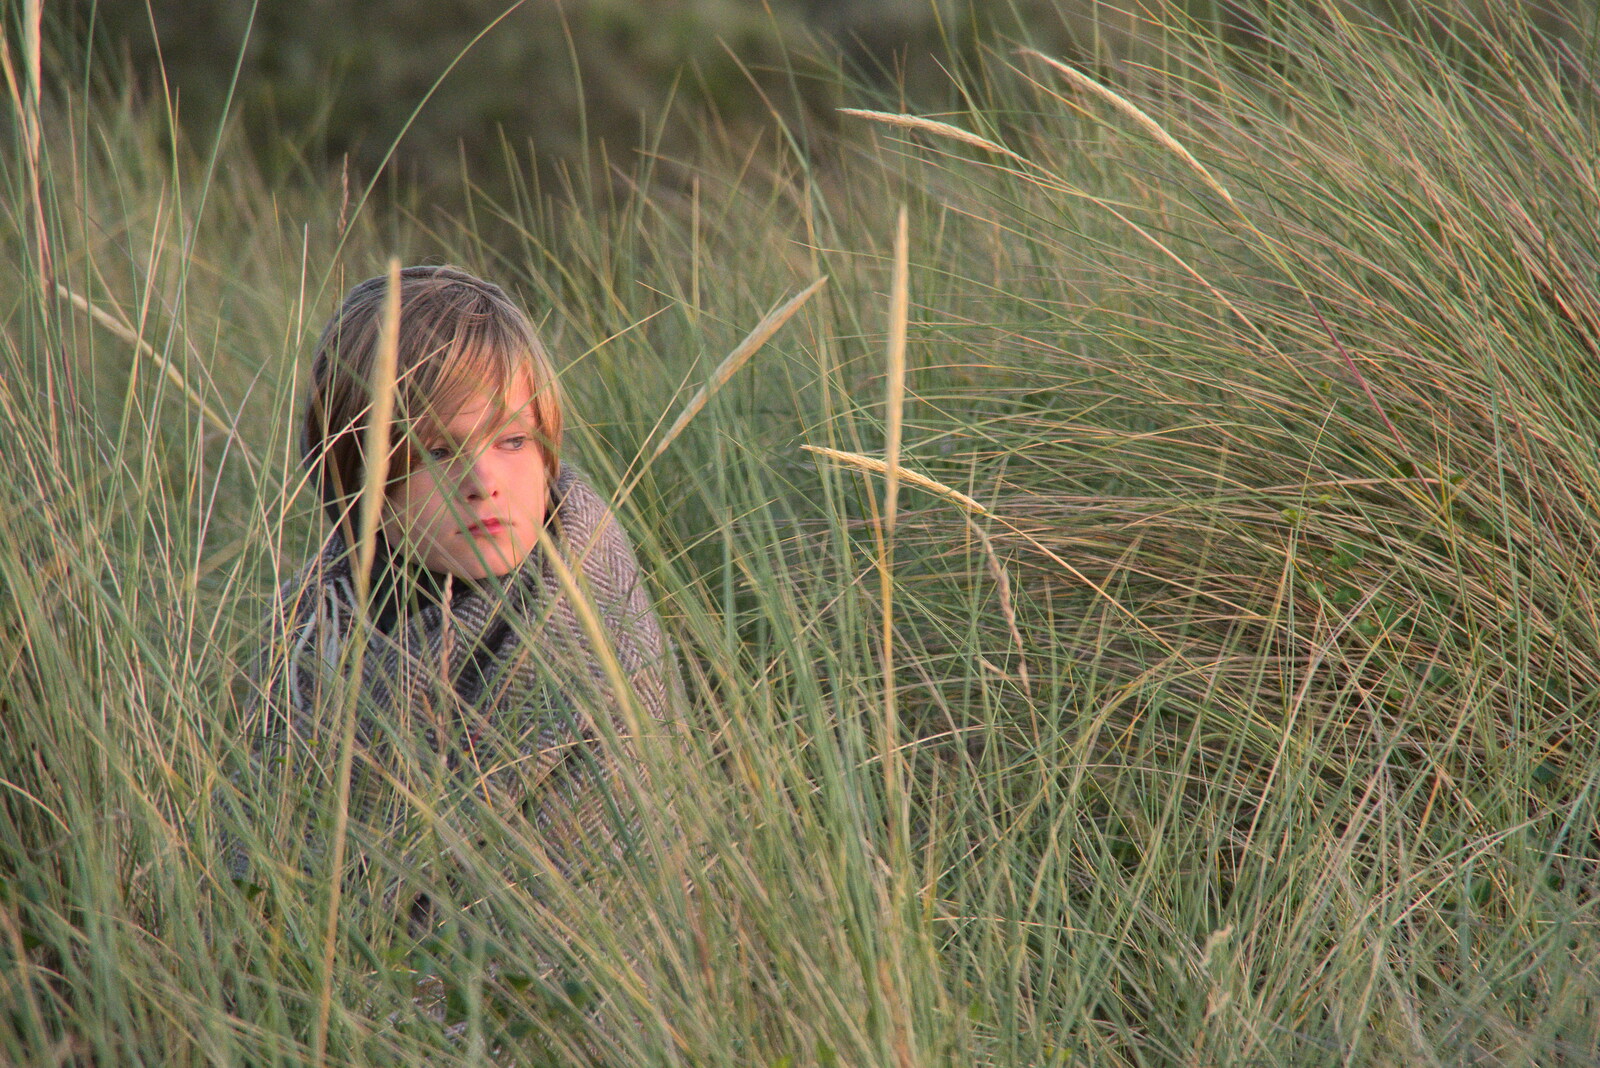 Harry sits in the dune grass from Camping in the Dunes, Waxham Sands, Norfolk - 9th July 2022